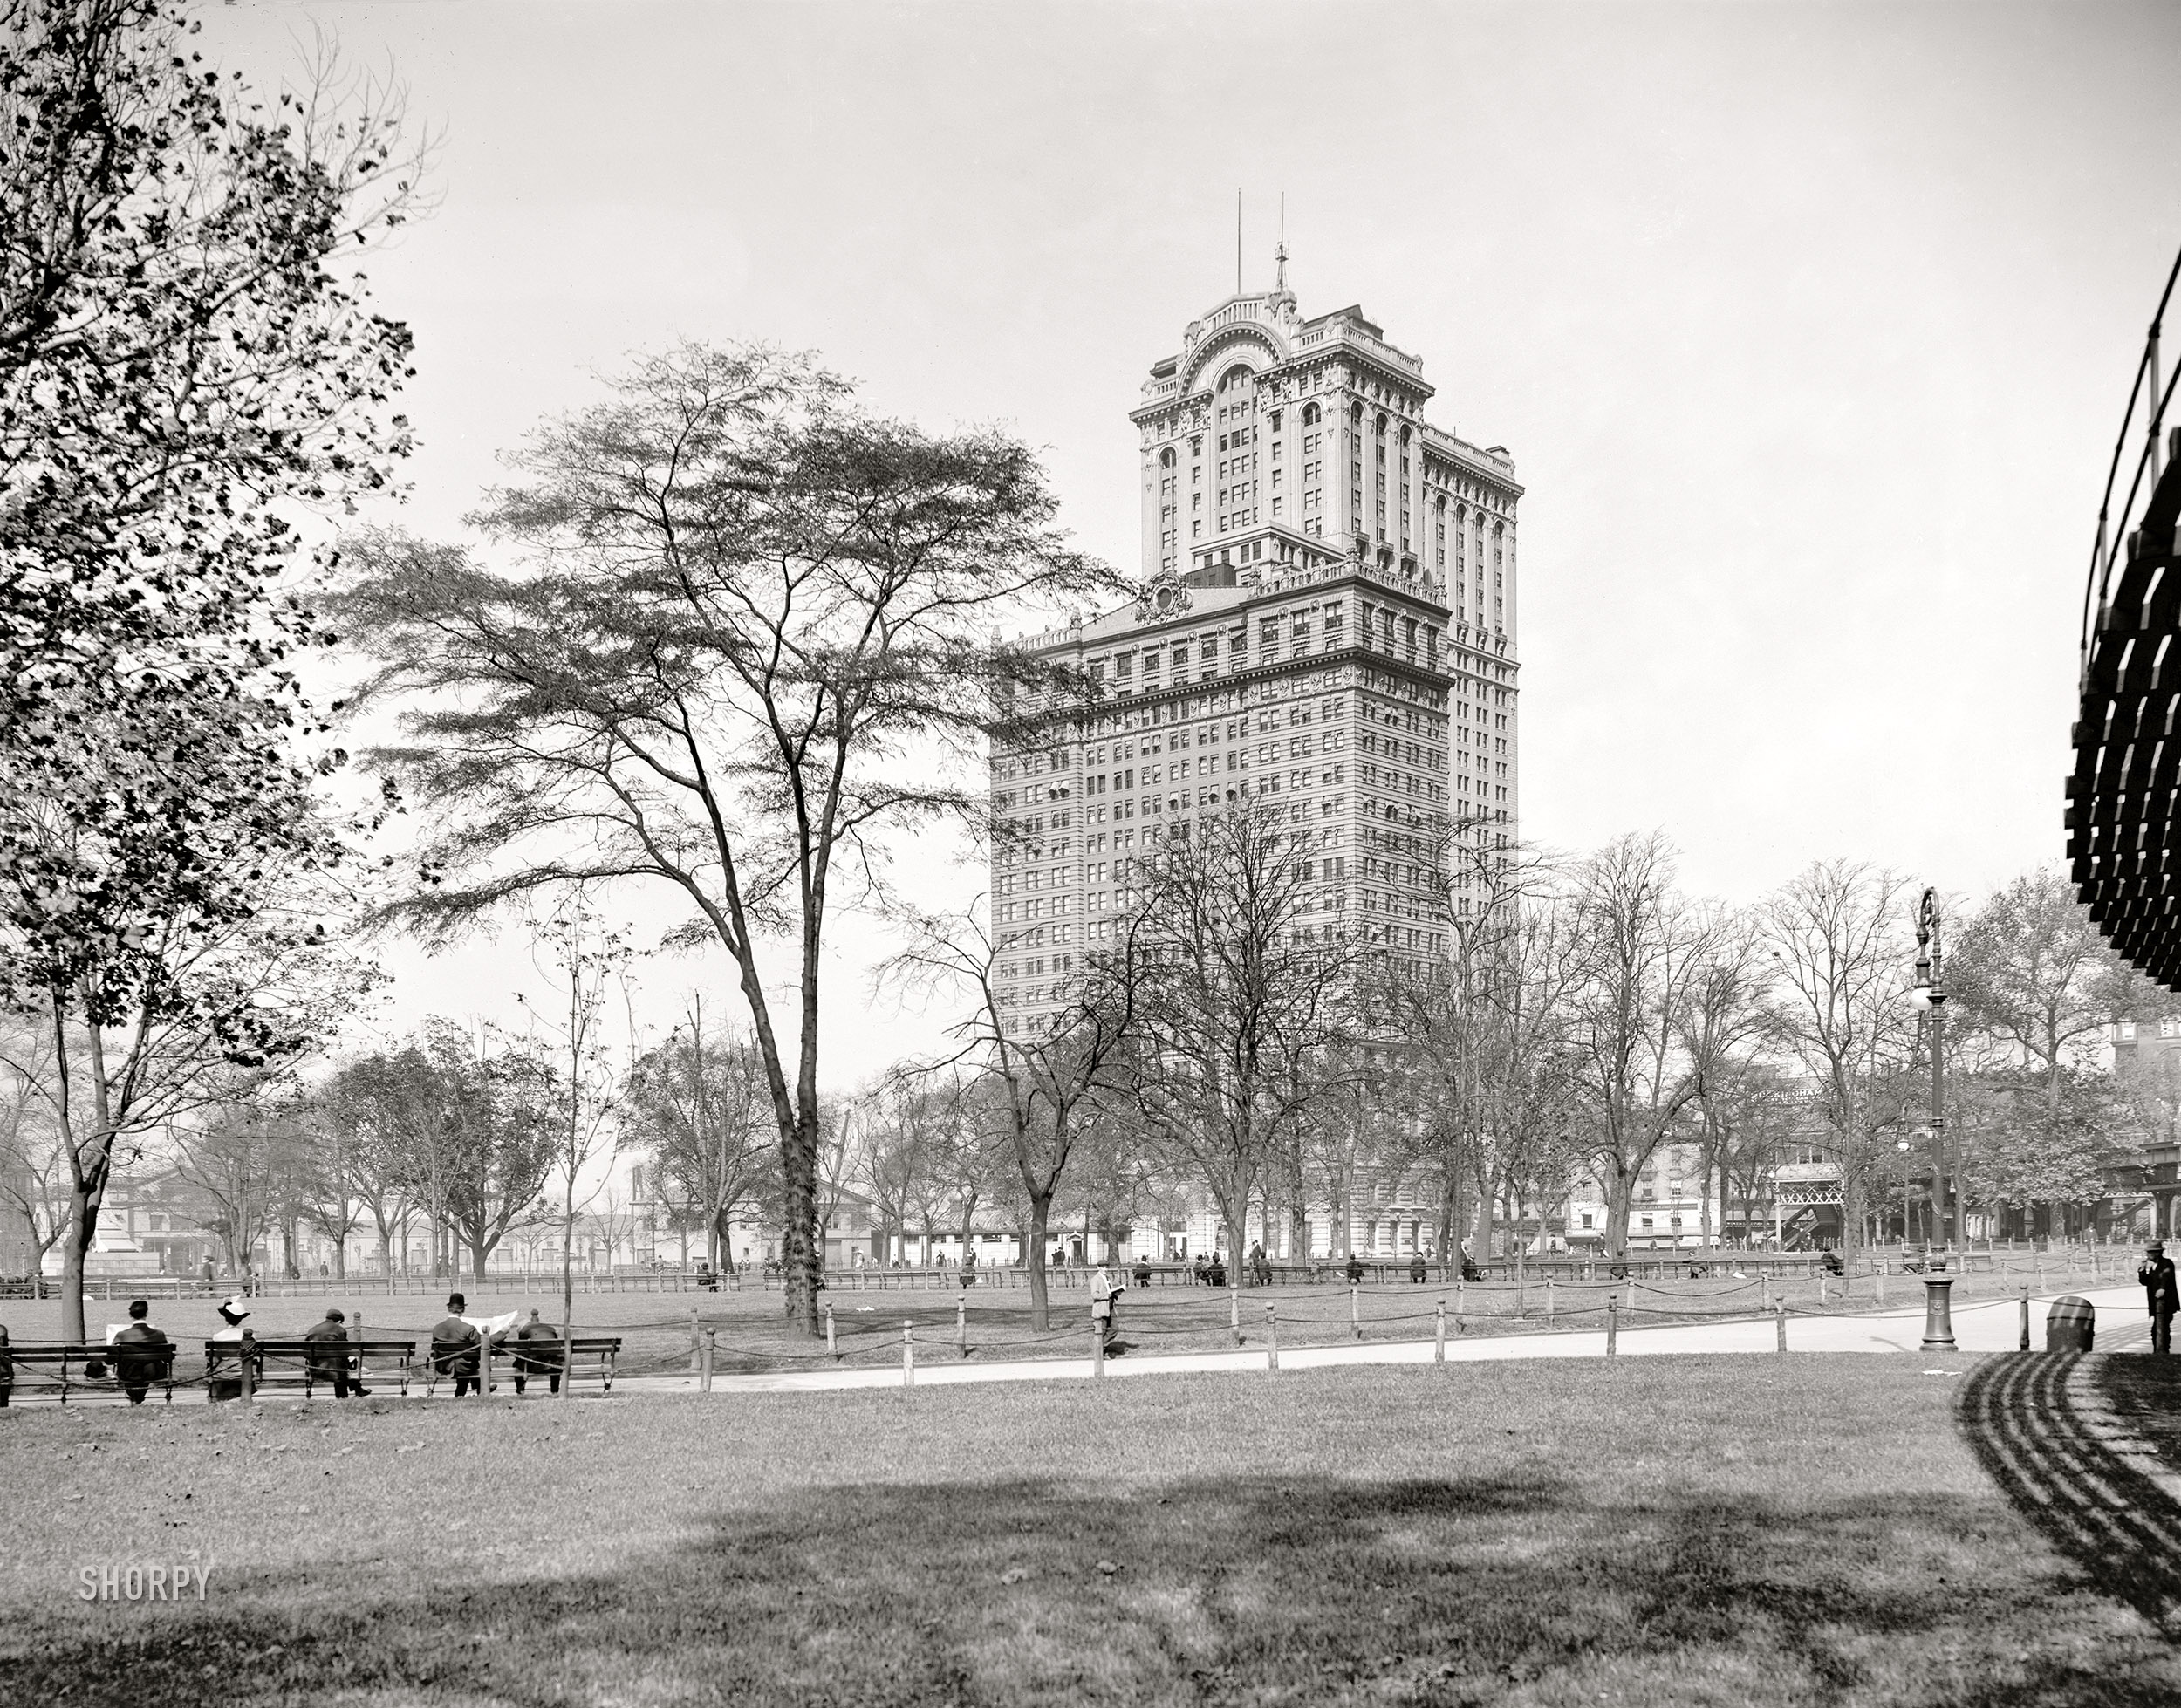 New York circa 1911. "Whitehall buildings from Battery Park." The Whitehall Building of 1902-04 ("Lesser Whitehall") and the Greater Whitehall annex of 1908-1910. View full size.